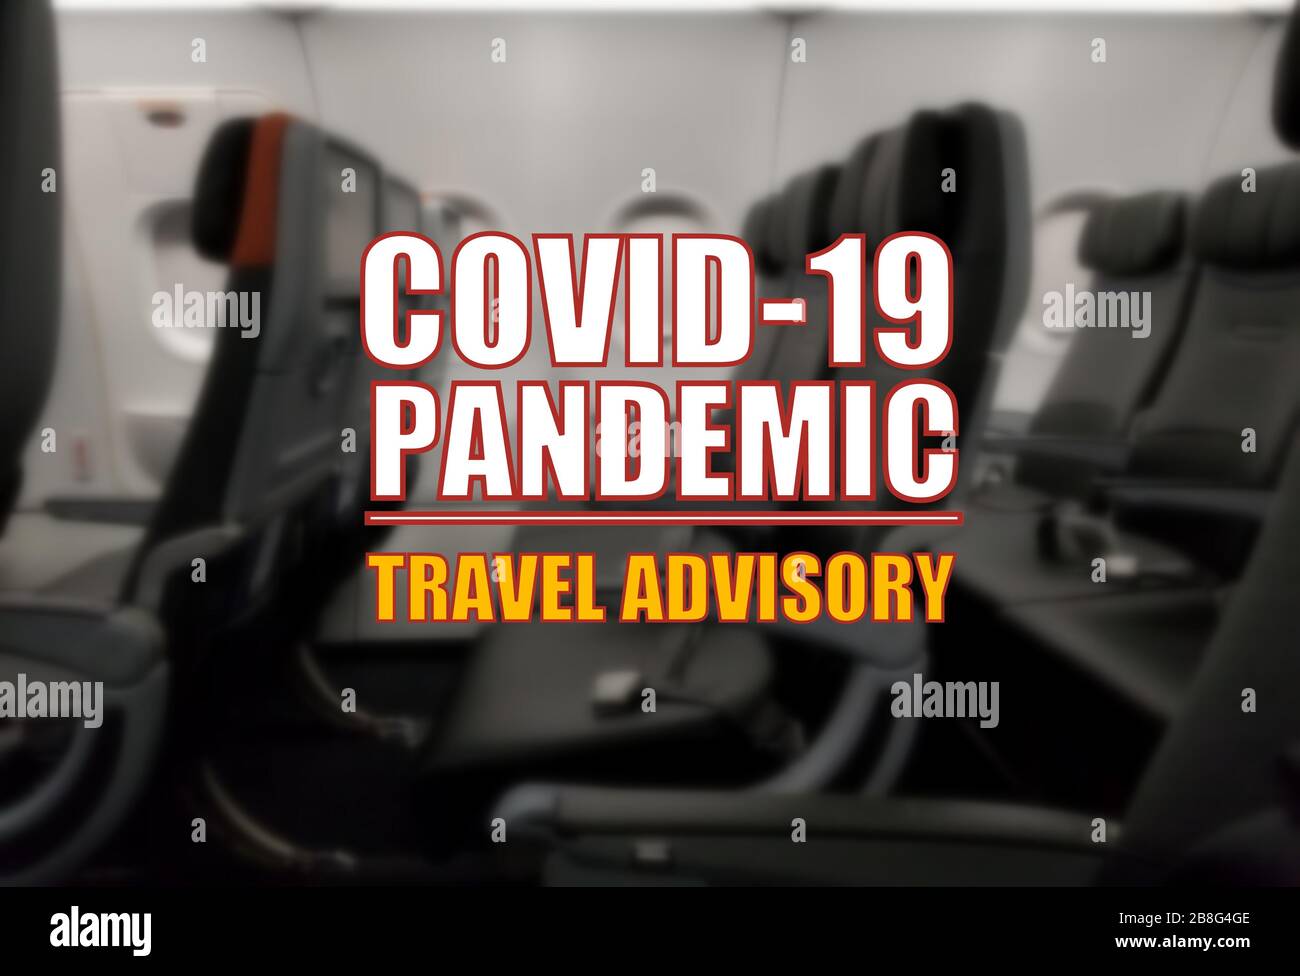 Covid-19 pandemic travel advisory on a blurry background Stock Photo